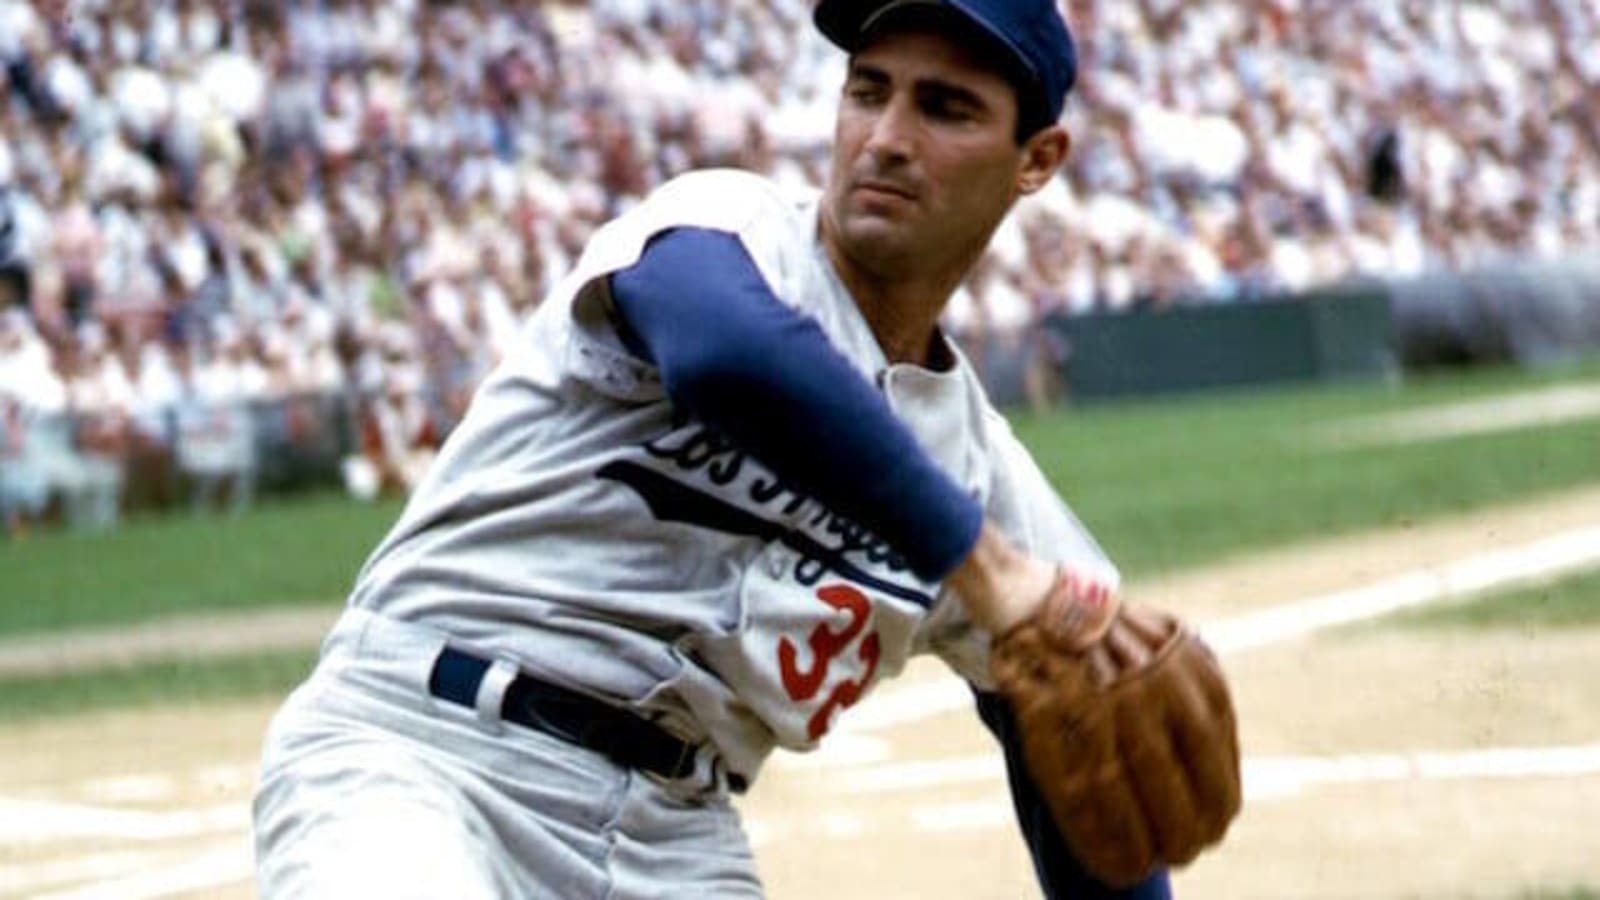 This Day In Dodgers History: Sandy Koufax Complete Game On Two Days’ Rest In Game 7 Of 1965 World Series